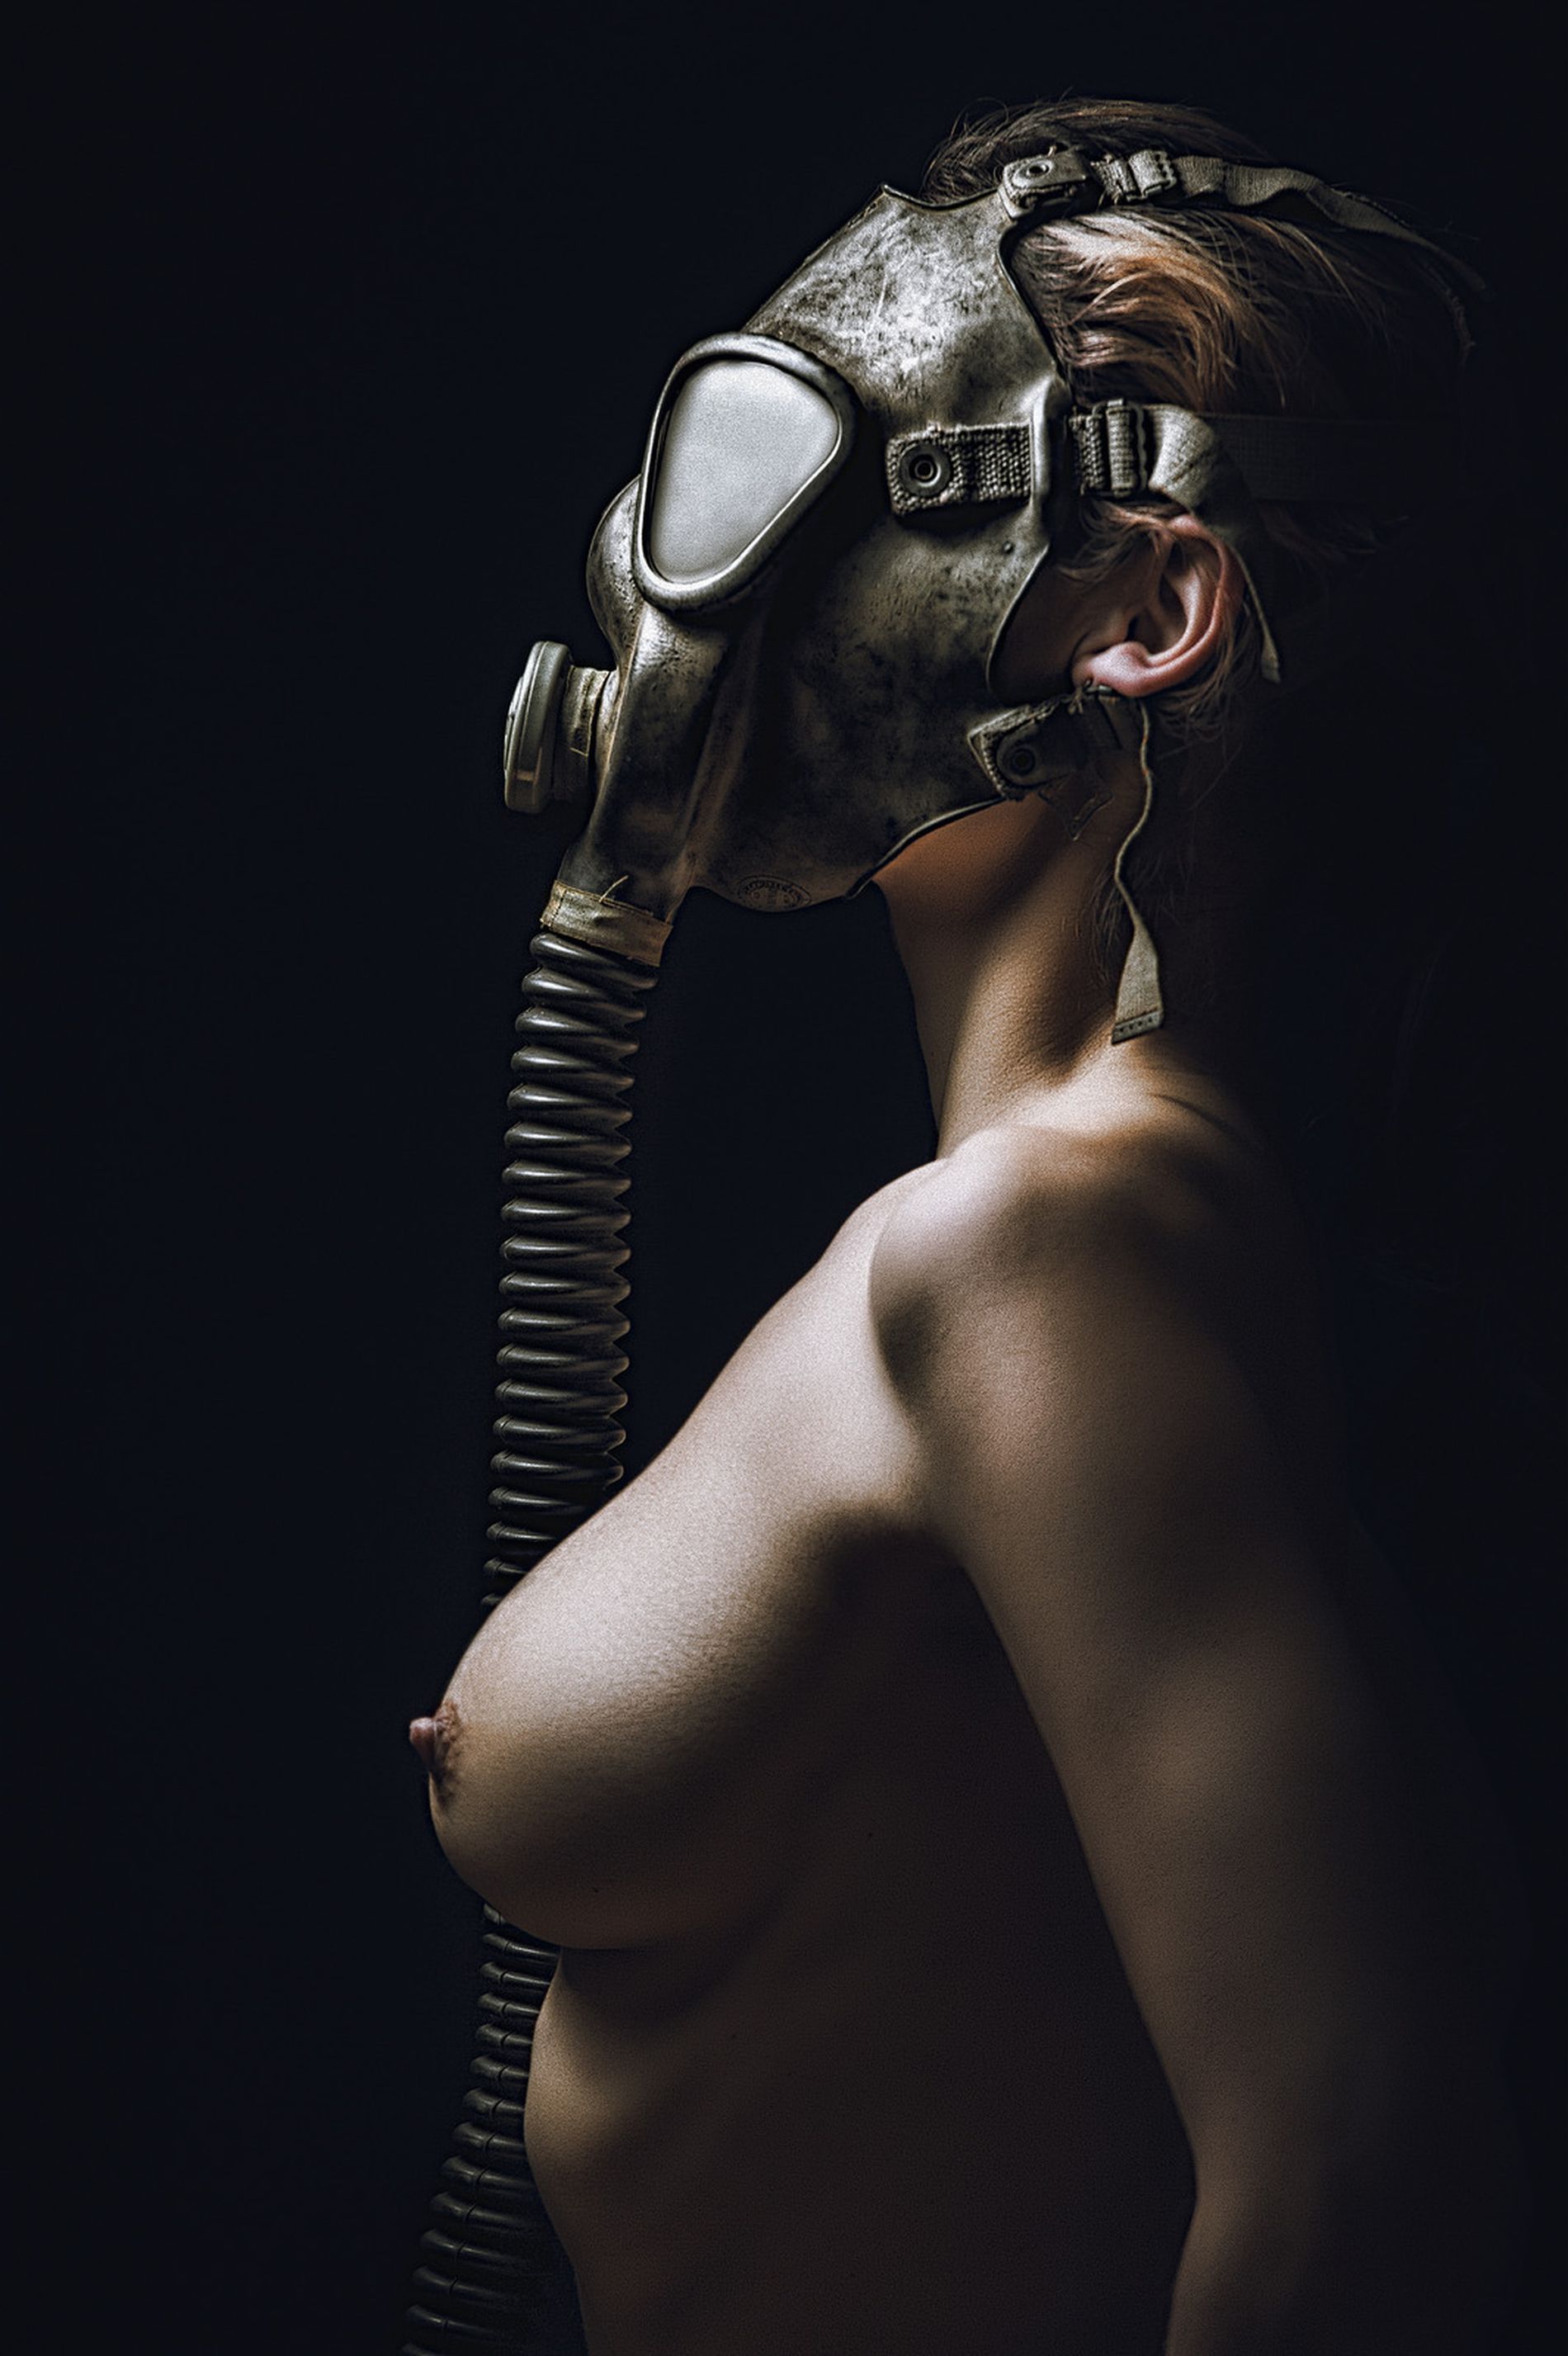 BDSM sm role play gas mask fetish and sexual fantasy